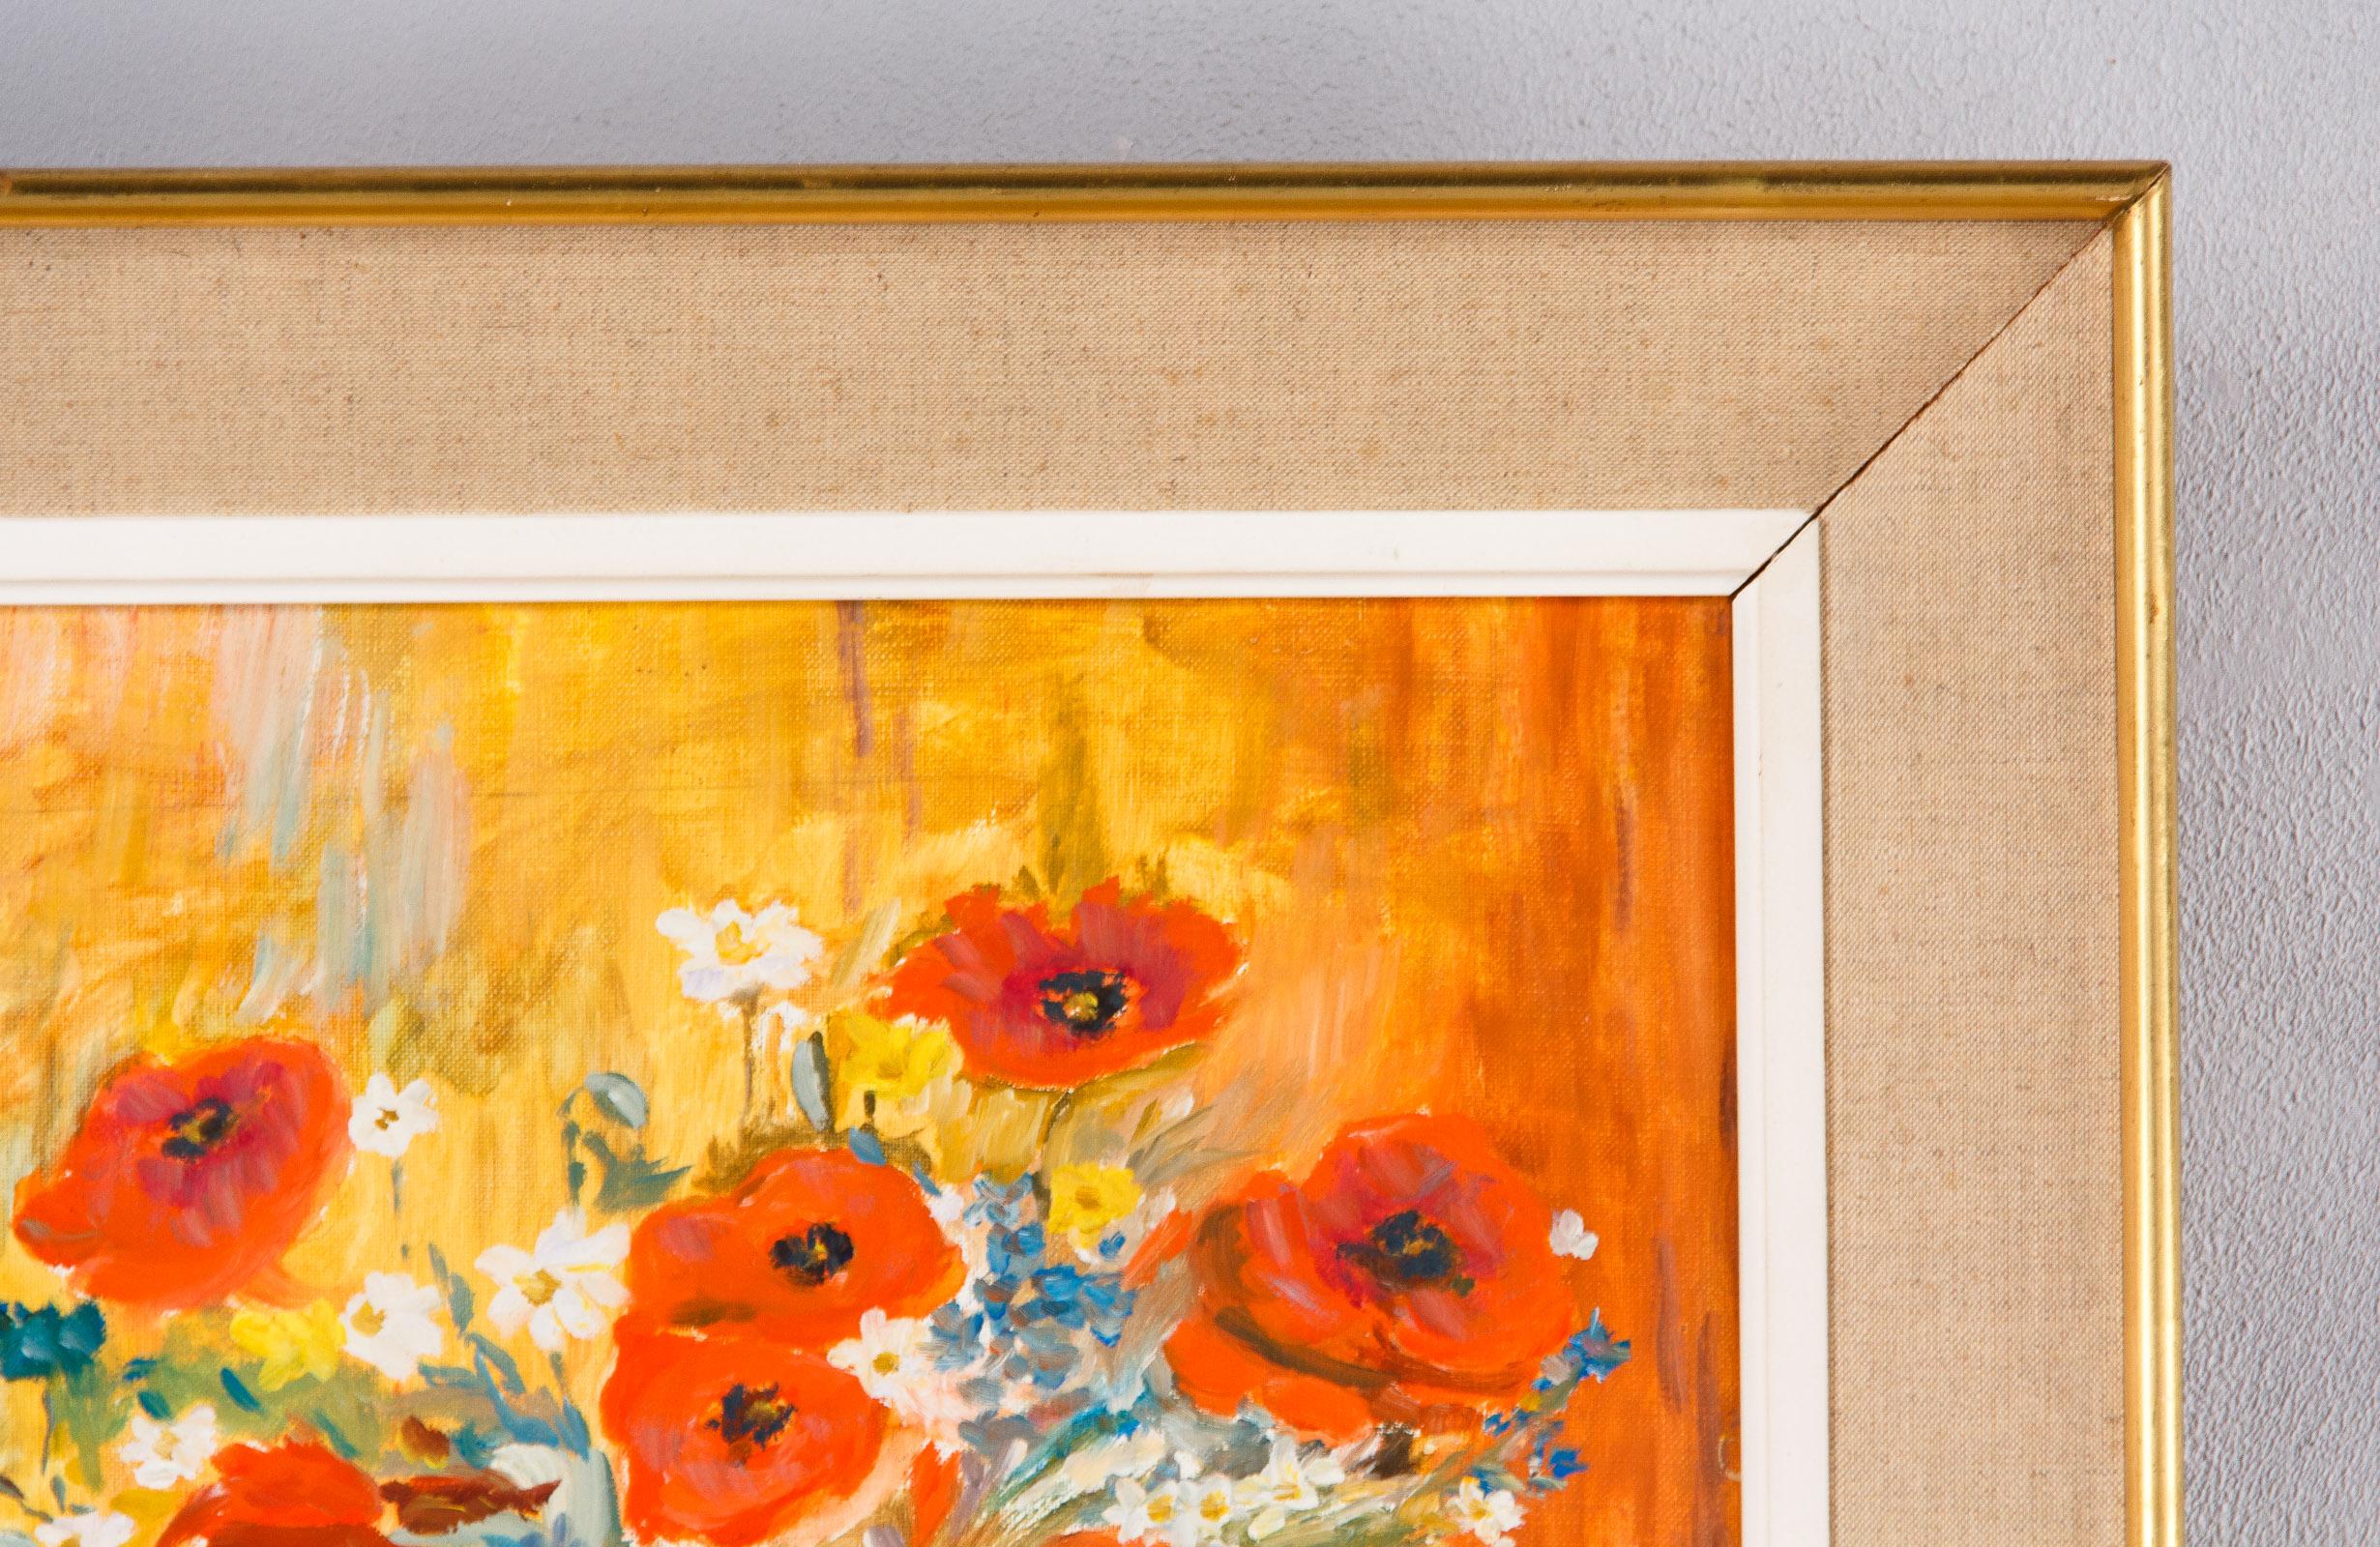 French Vintage Oil on Canvass of Poppies in a Vase, 20th Century 1